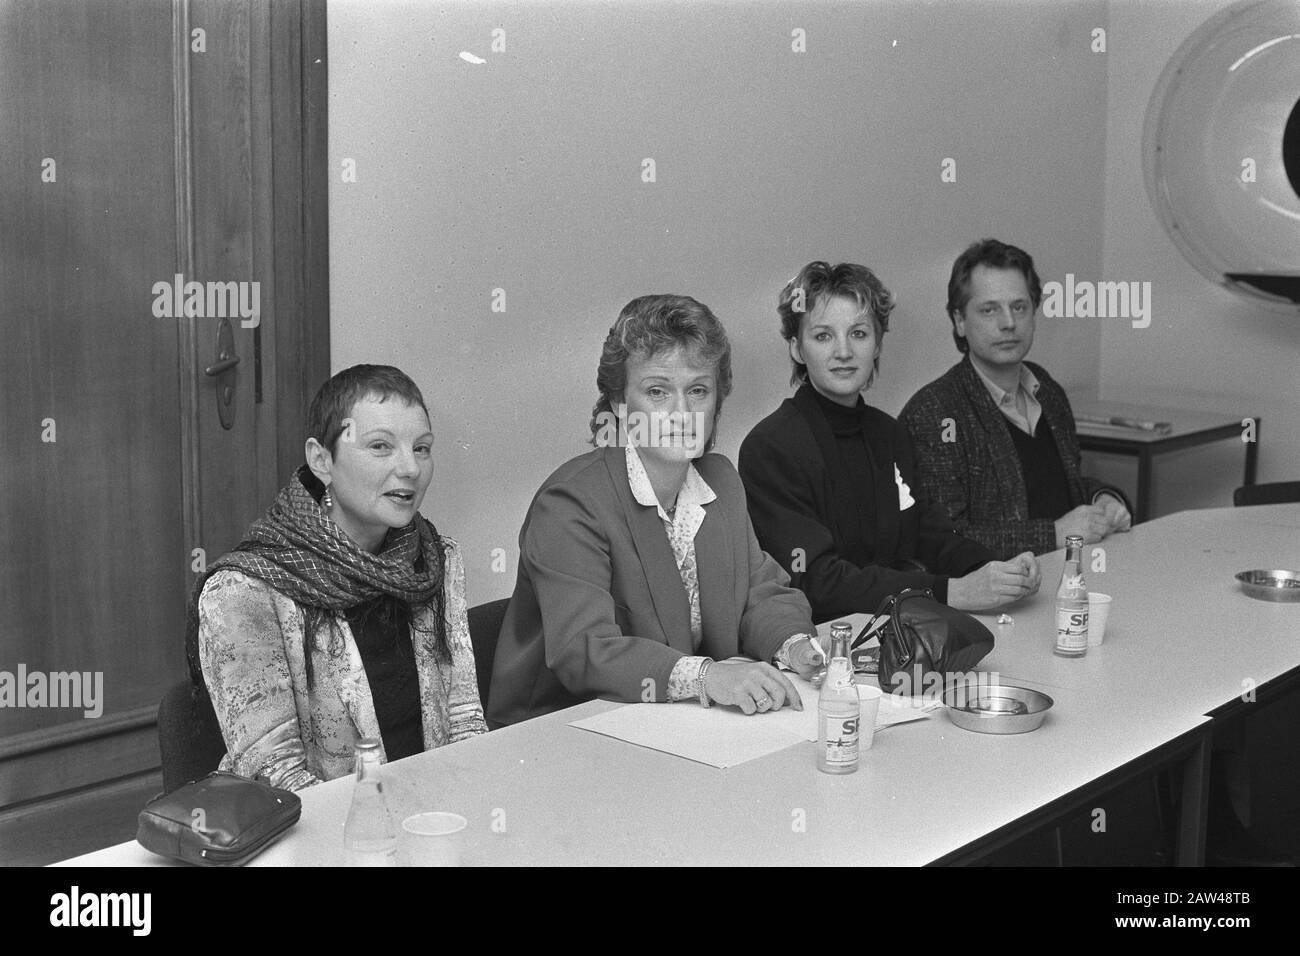 Labor parliamentarian Nora Salomons installed as ombudsman municipality of Amsterdam, amongst staff Date: February 4, 1987 Location: Amsterdam, Noord-Holland Keywords: plants, MPs Person Name : Salomons, Nora Institution Name: Ombudsman Stock Photo